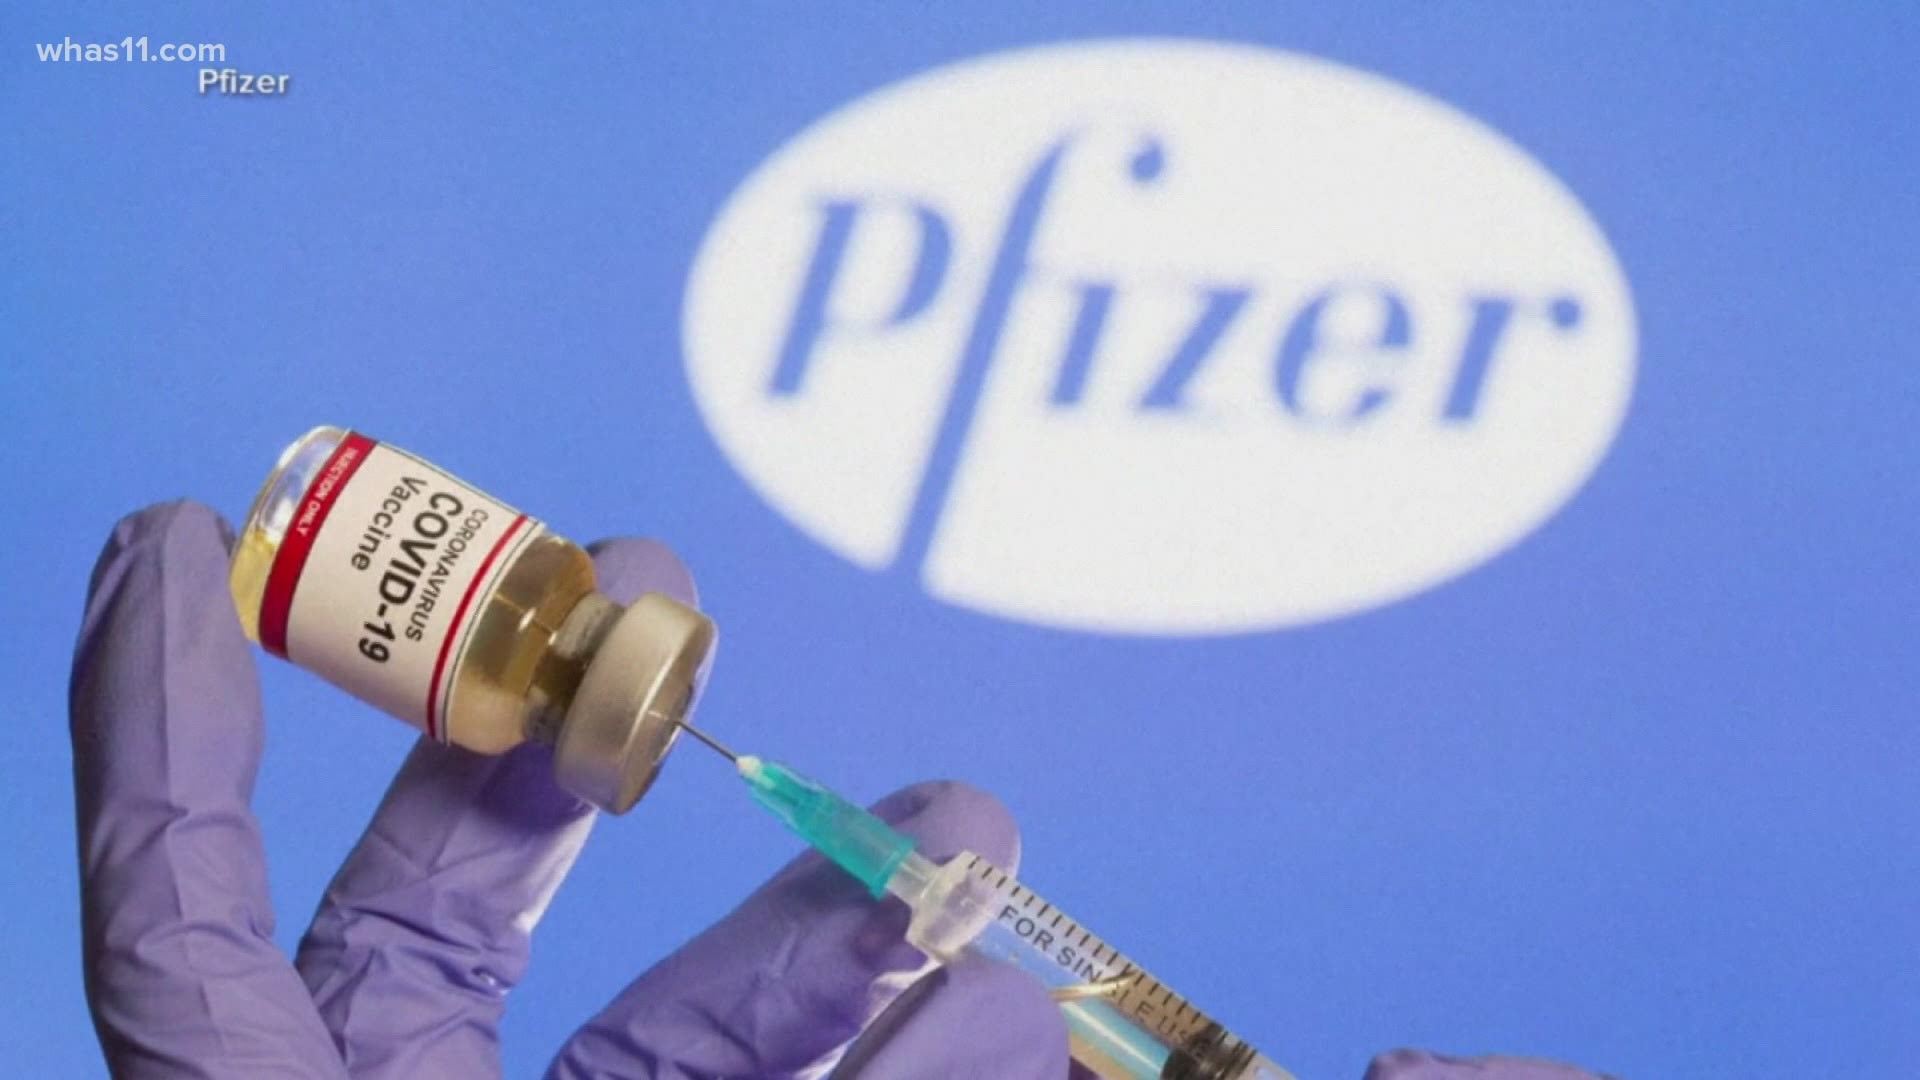 UofL Health's chief medical officer says he expects the FDA's committee to give an emergency use authorization to the Pfizer vaccine.